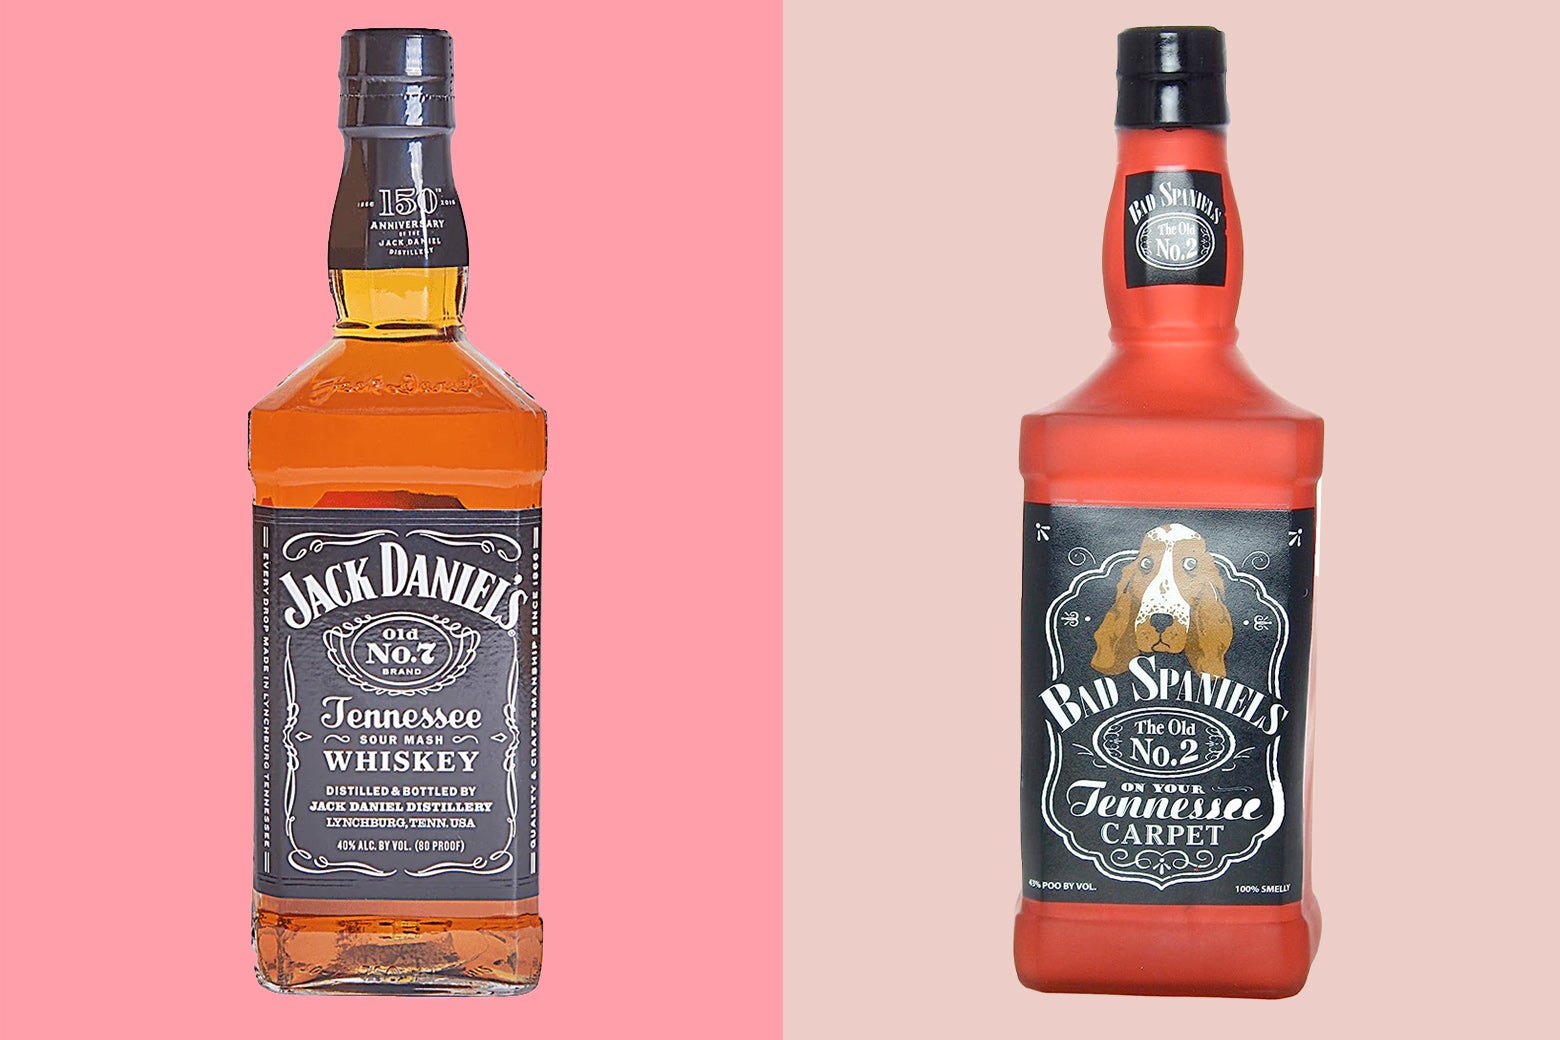 A side-by-side image of a bottle of Jack Daniel's No.7 Tennessee Whiskey and Bad Spaniels No.2 On Your Tennessee Carpet, a dog toy by VIP Products LLC, that was involved in a Supreme Court battle of trademark infringement. 